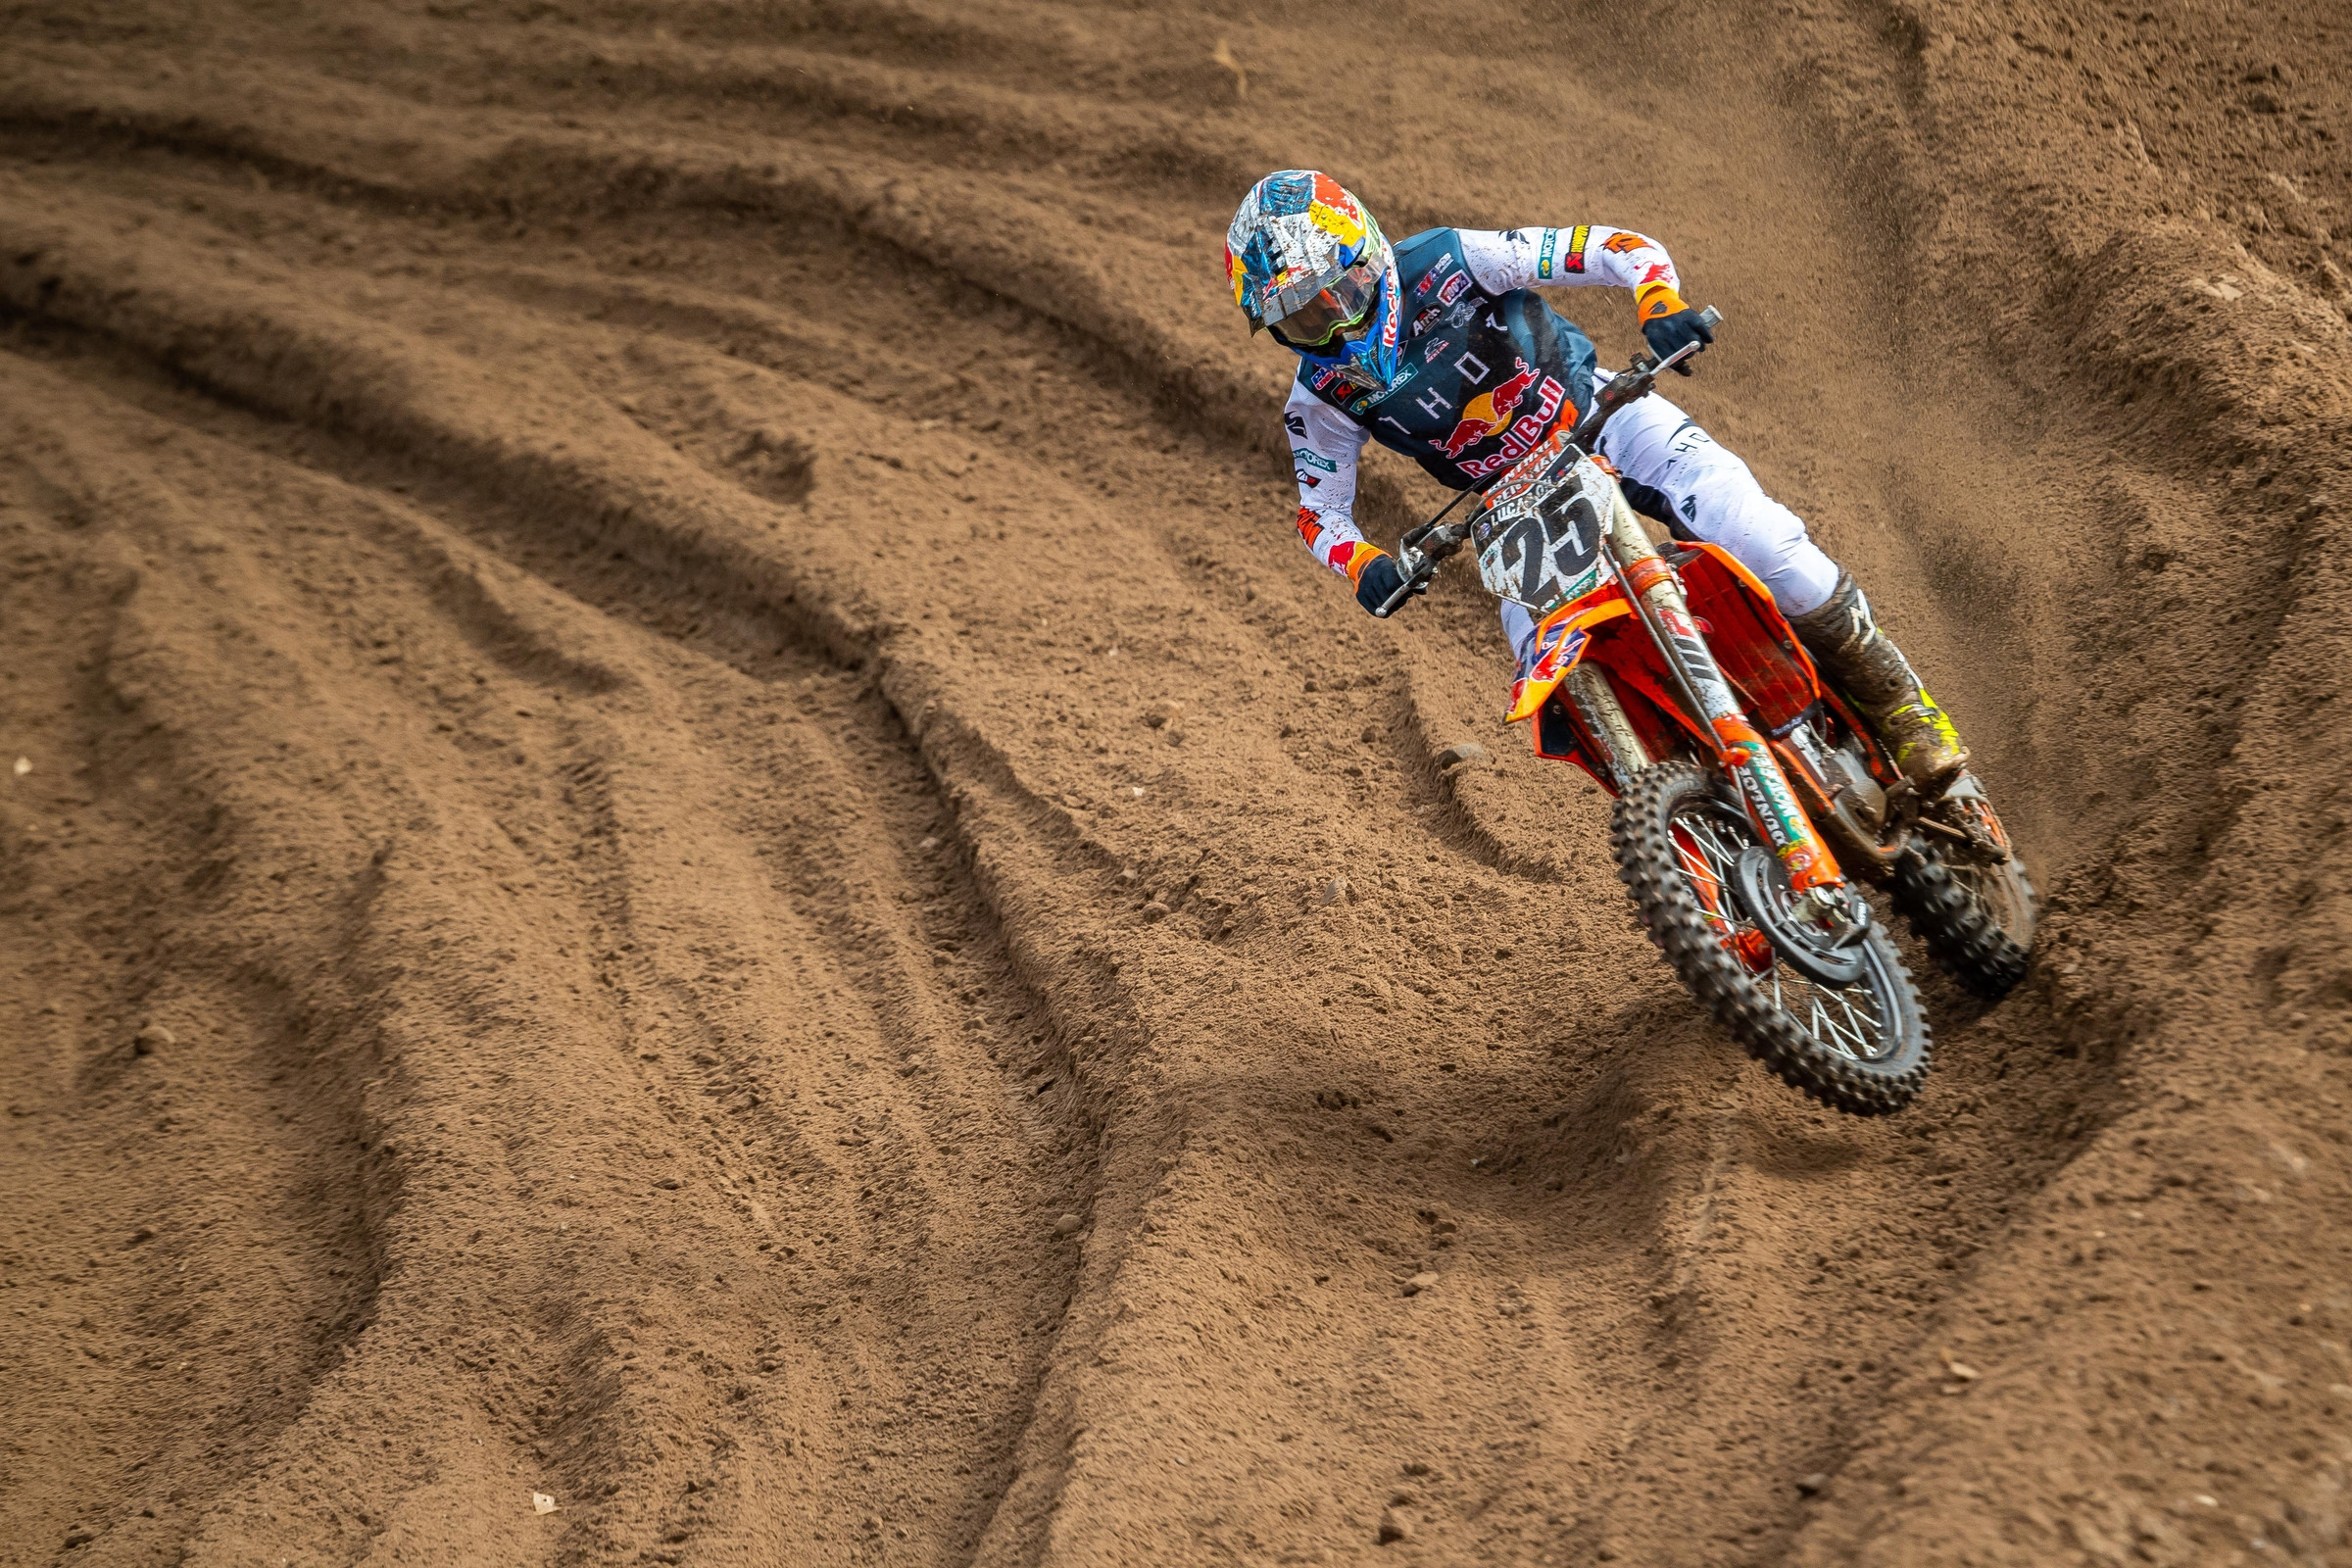 Stream and Watch 2021 Spring Creek and MXGP of the Netherlands on TV